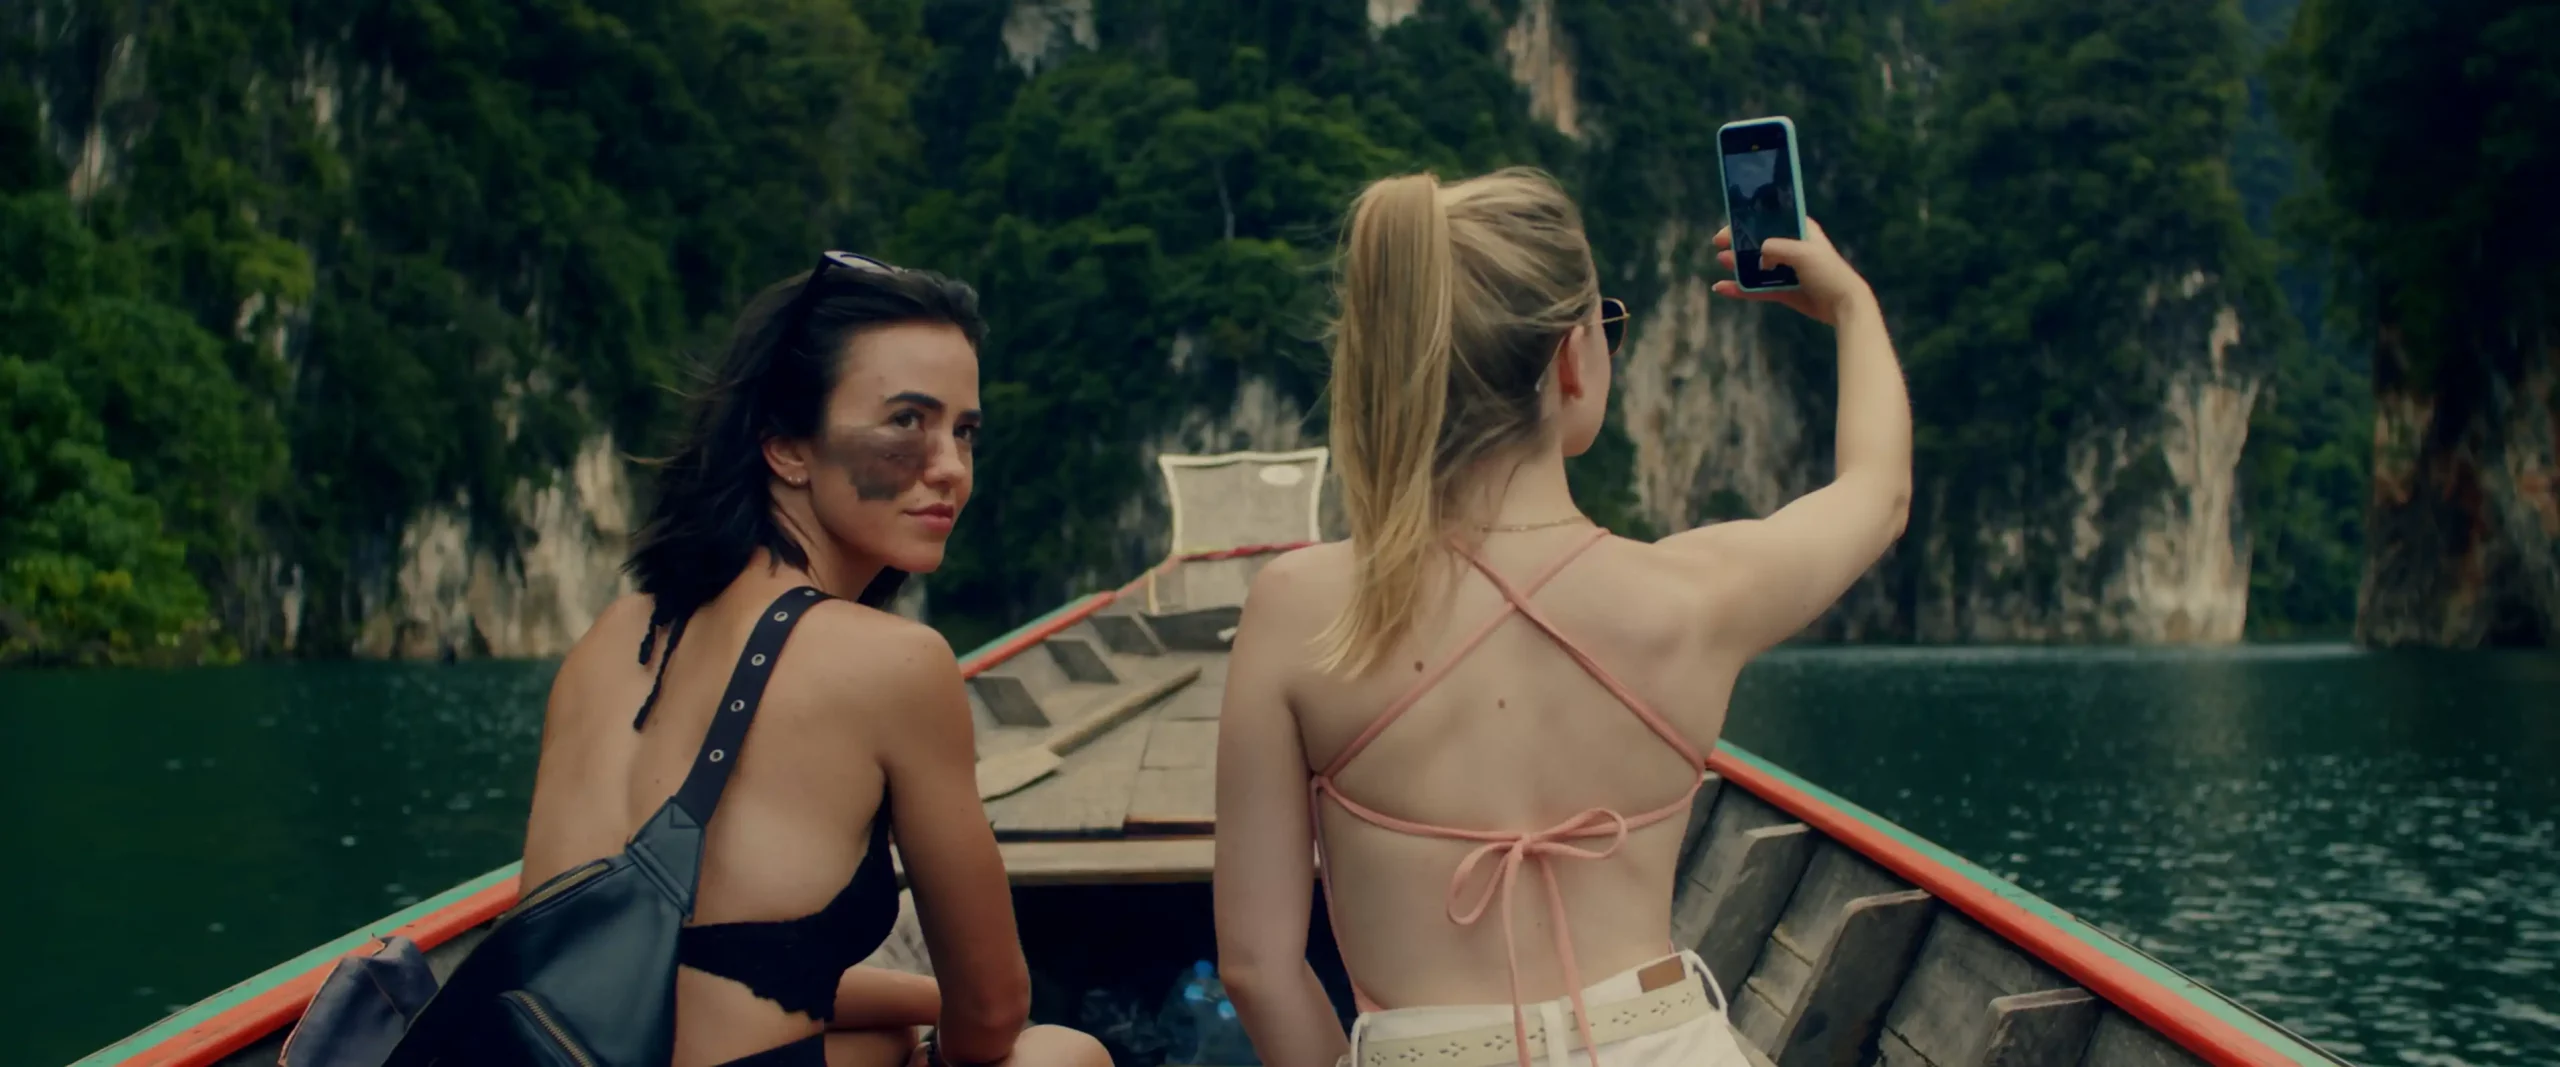 Two girls are on a boat on a river. One of them looks back behind them with a slight smile while the other takes a selfie.